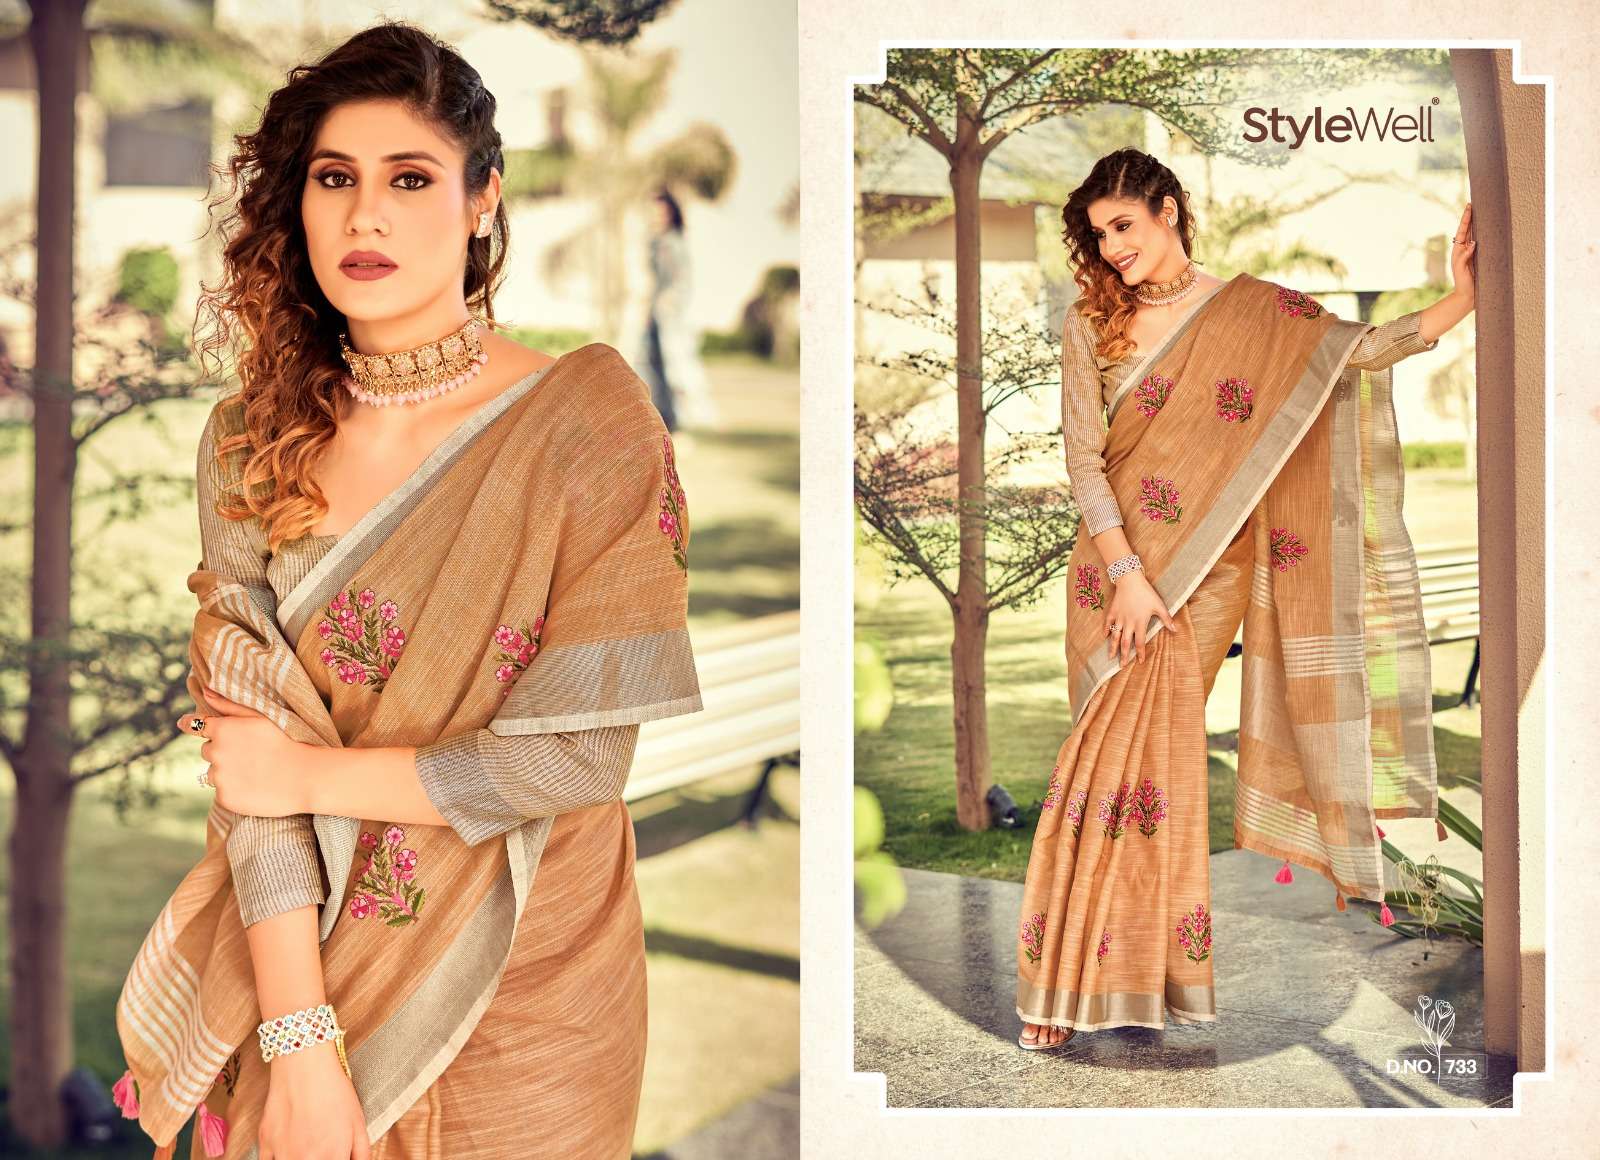 Kavya Vol-4 By Stylewell 731 To 738 Series Indian Traditional Wear Collection Beautiful Stylish Fancy Colorful Party Wear & Occasional Wear Linen Sarees At Wholesale Price